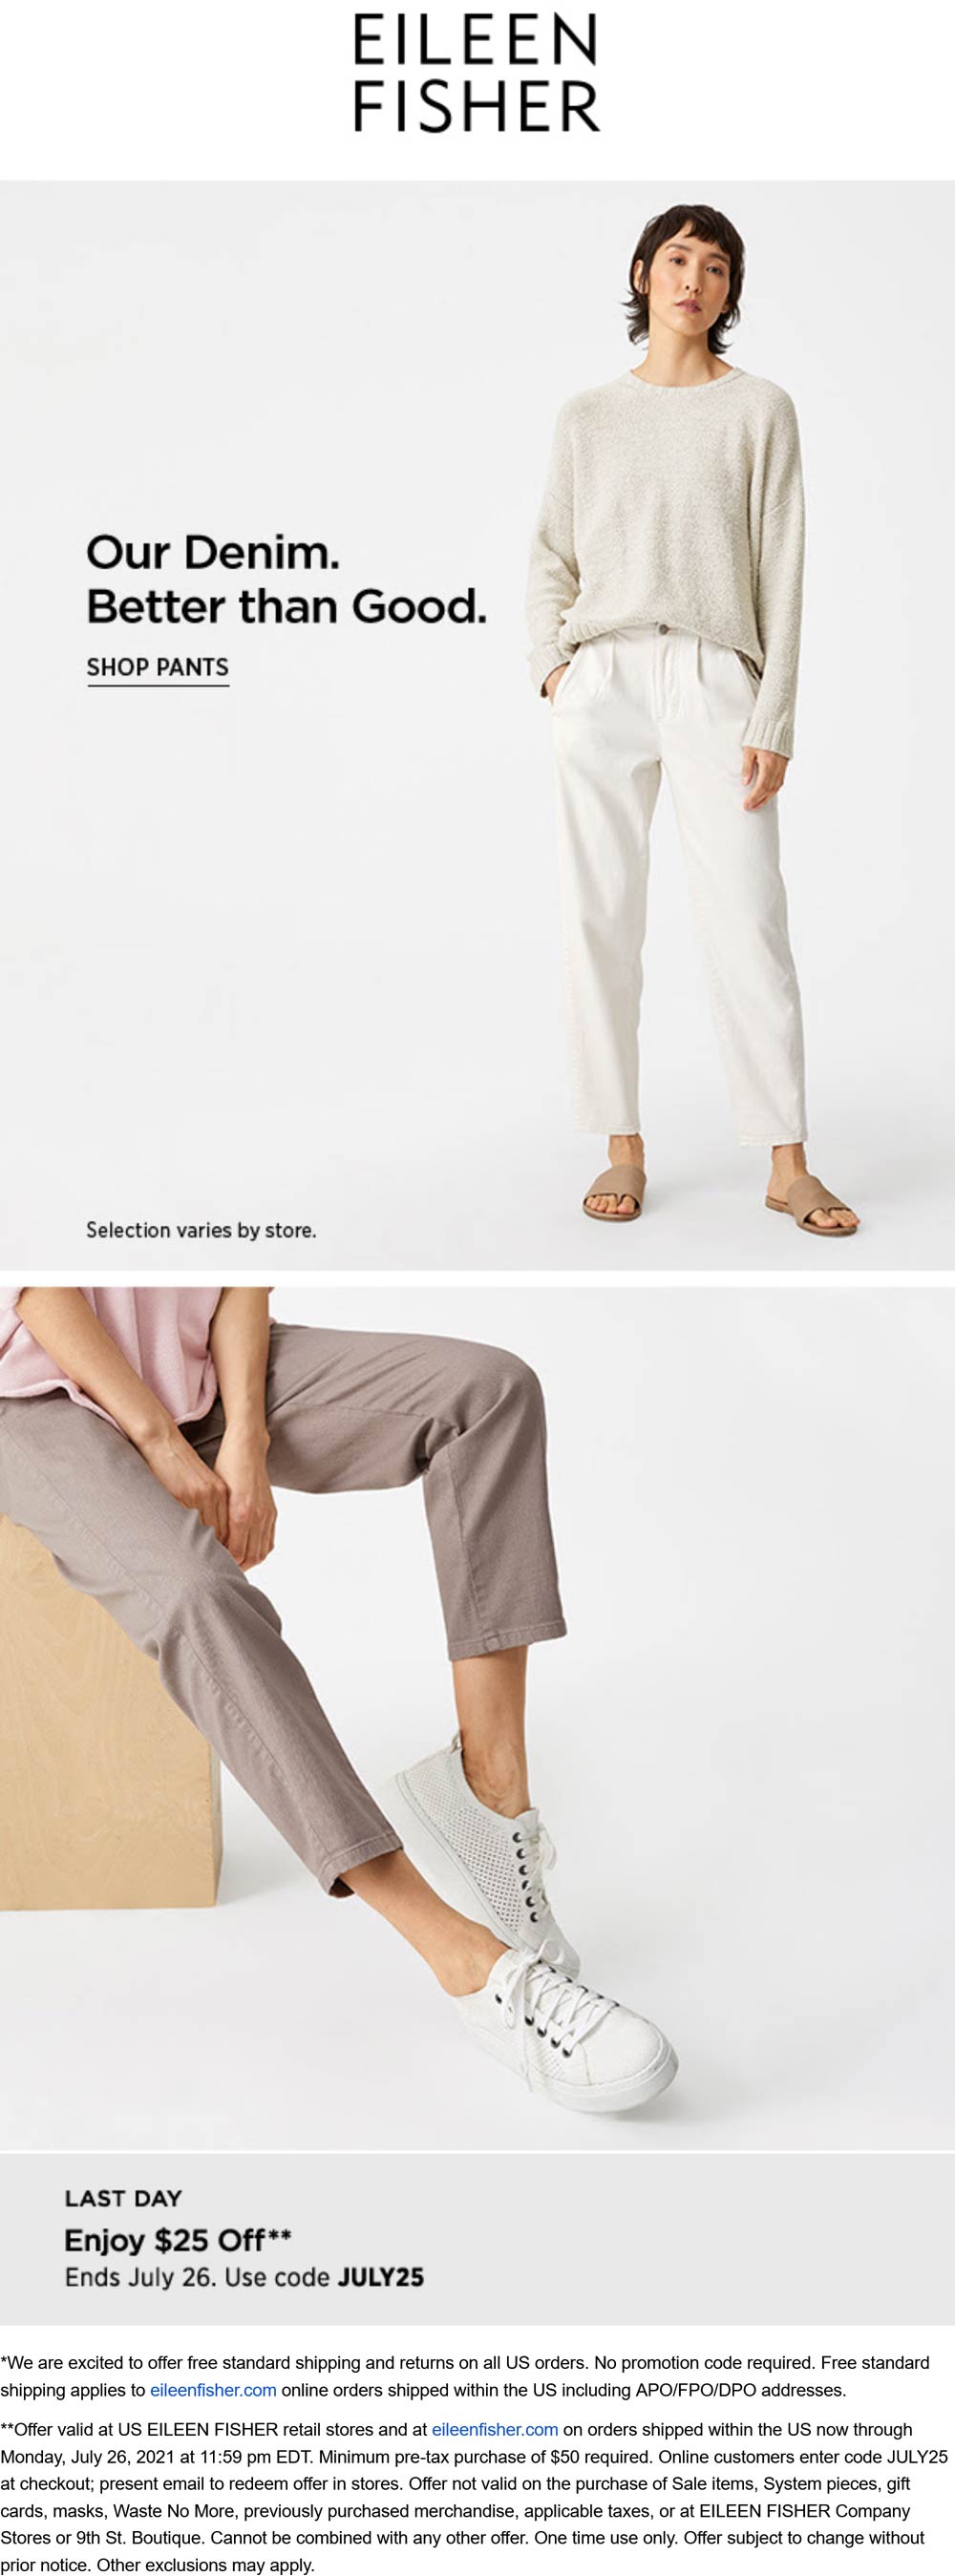 Eileen Fisher stores Coupon  $25 off $50 today at Eileen Fisher, or online via promo code JULY25 #eileenfisher 